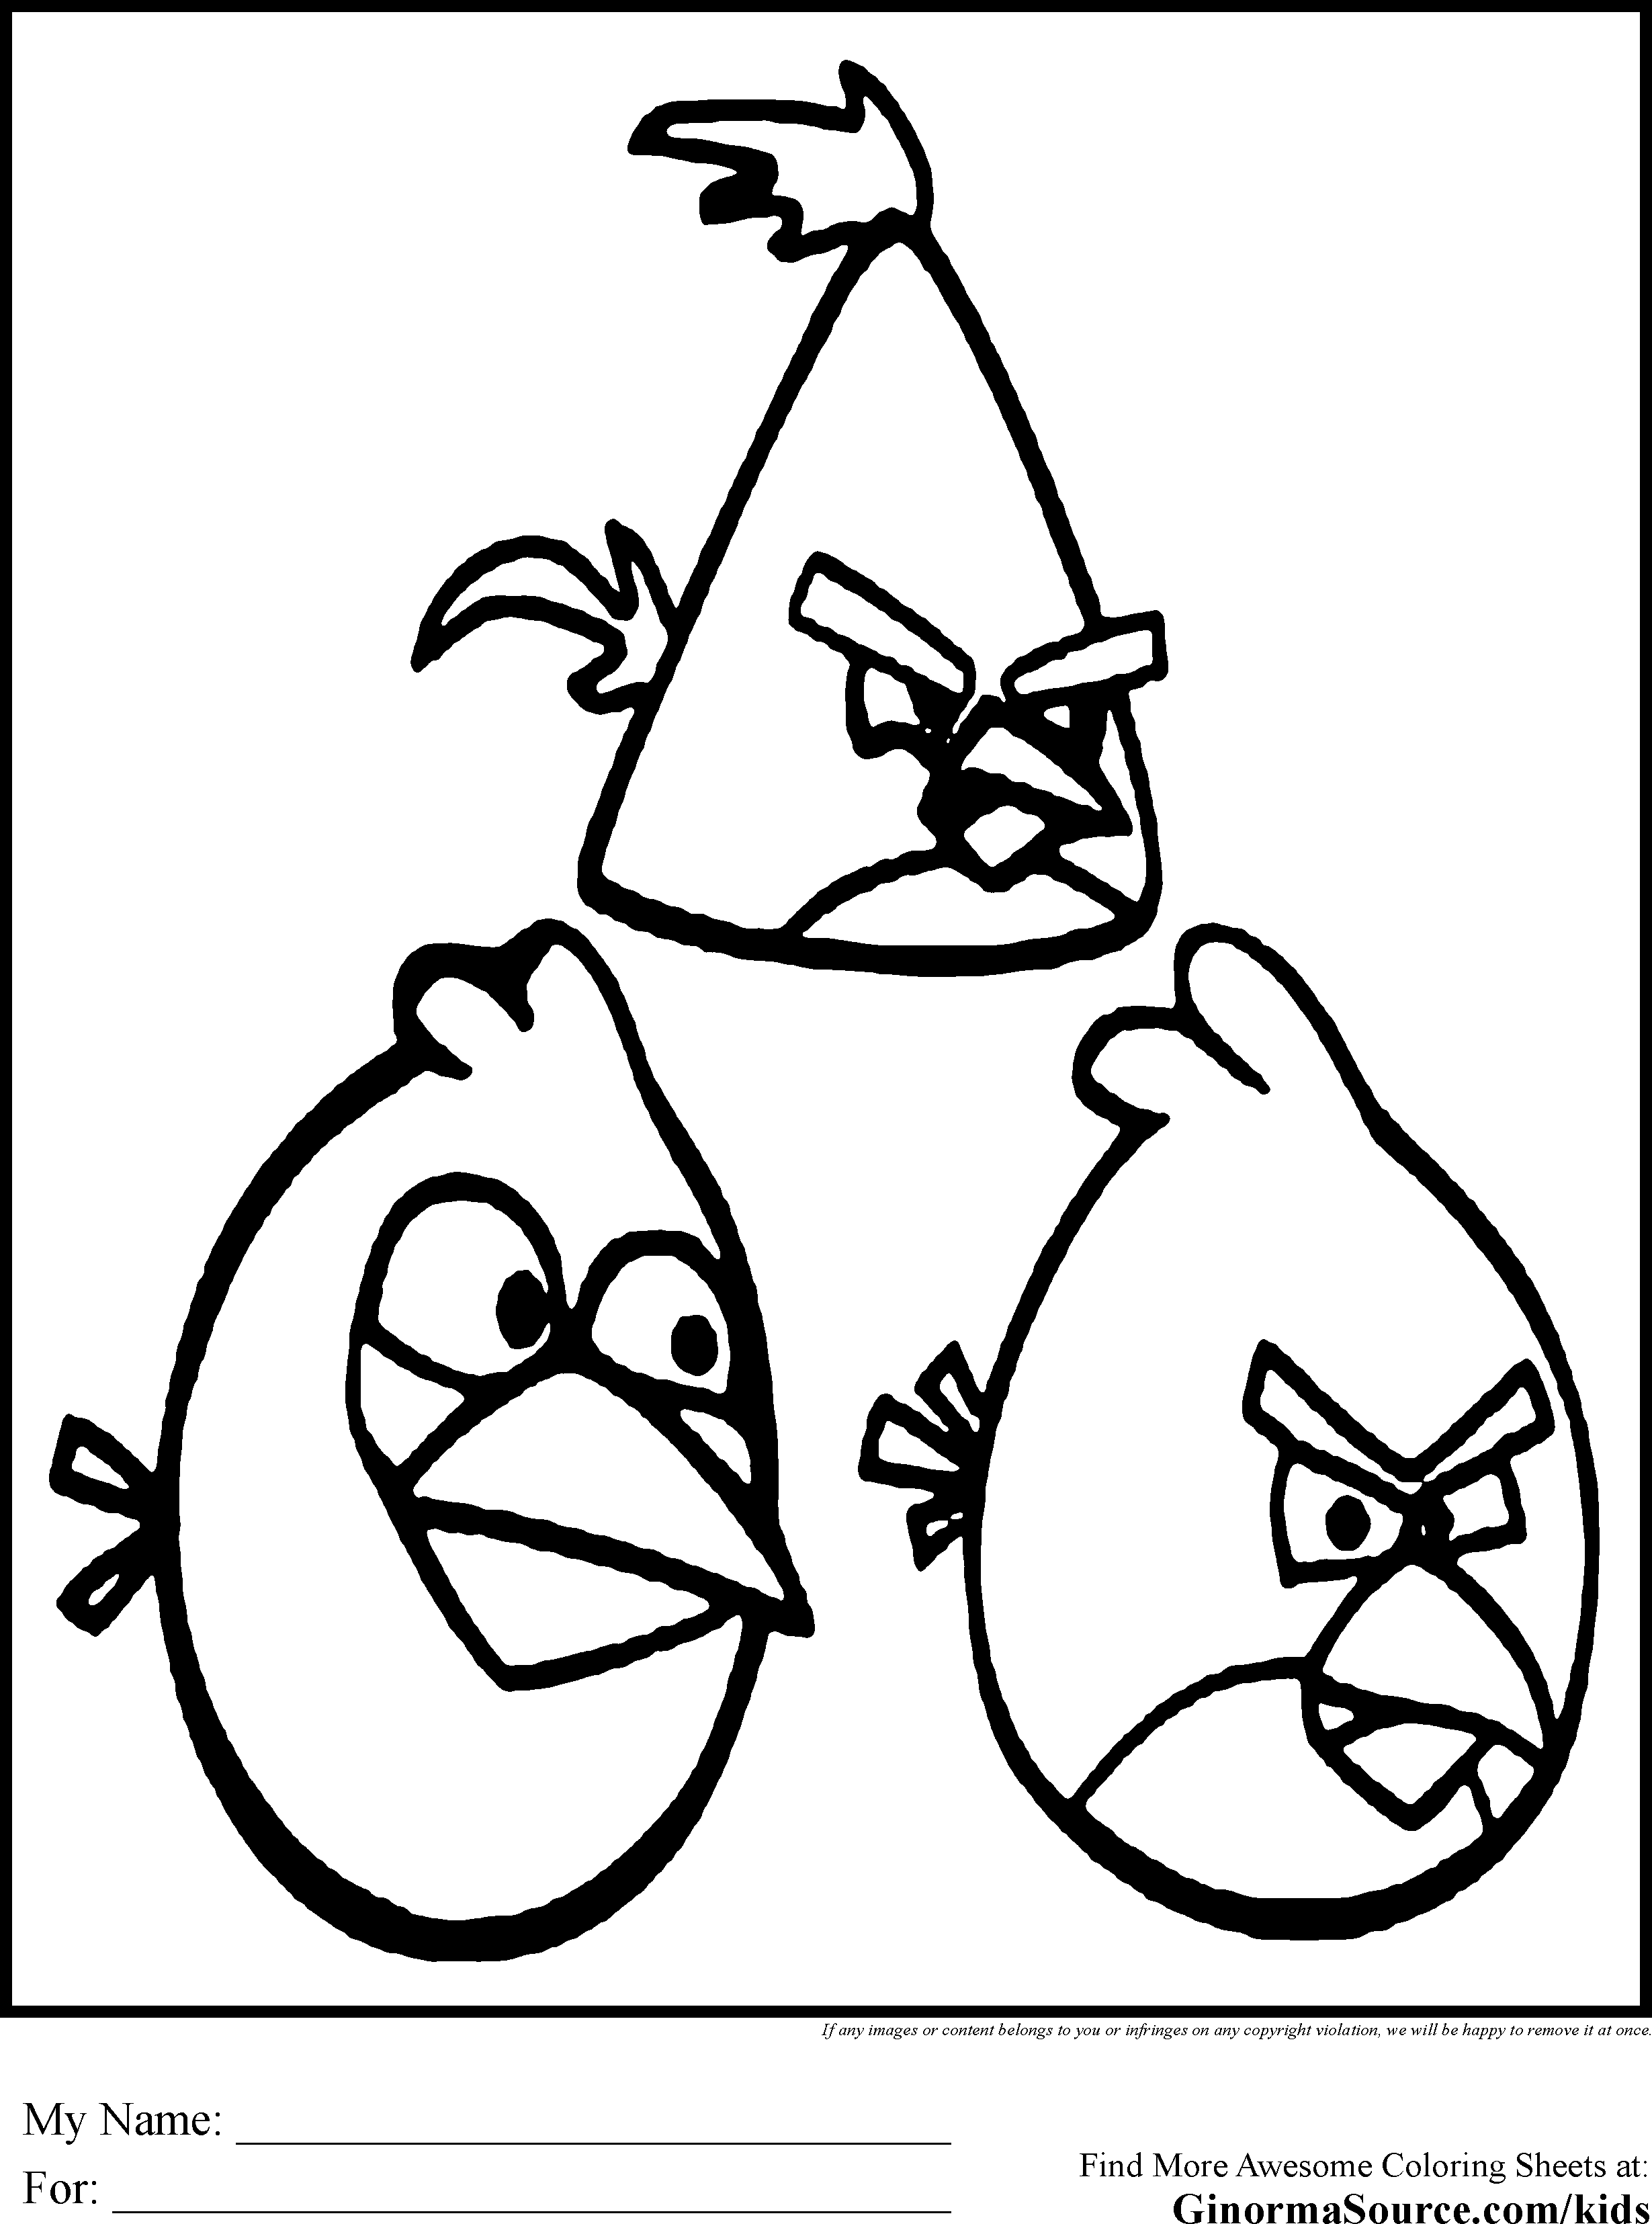  No Fear Angry Birds Coloring pages – GINORMAsource Kids